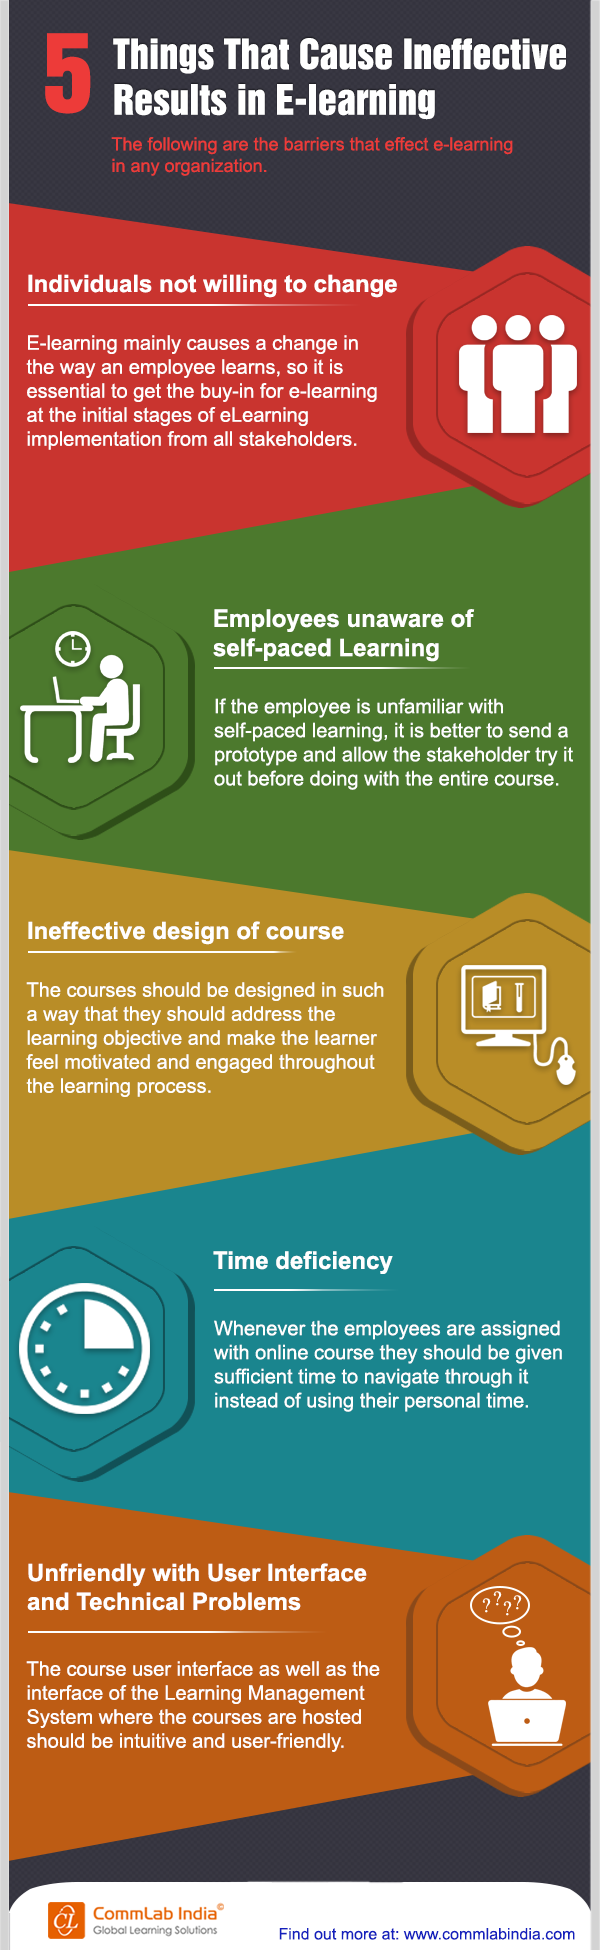 5 Things That Cause Ineffective Results in E-learning